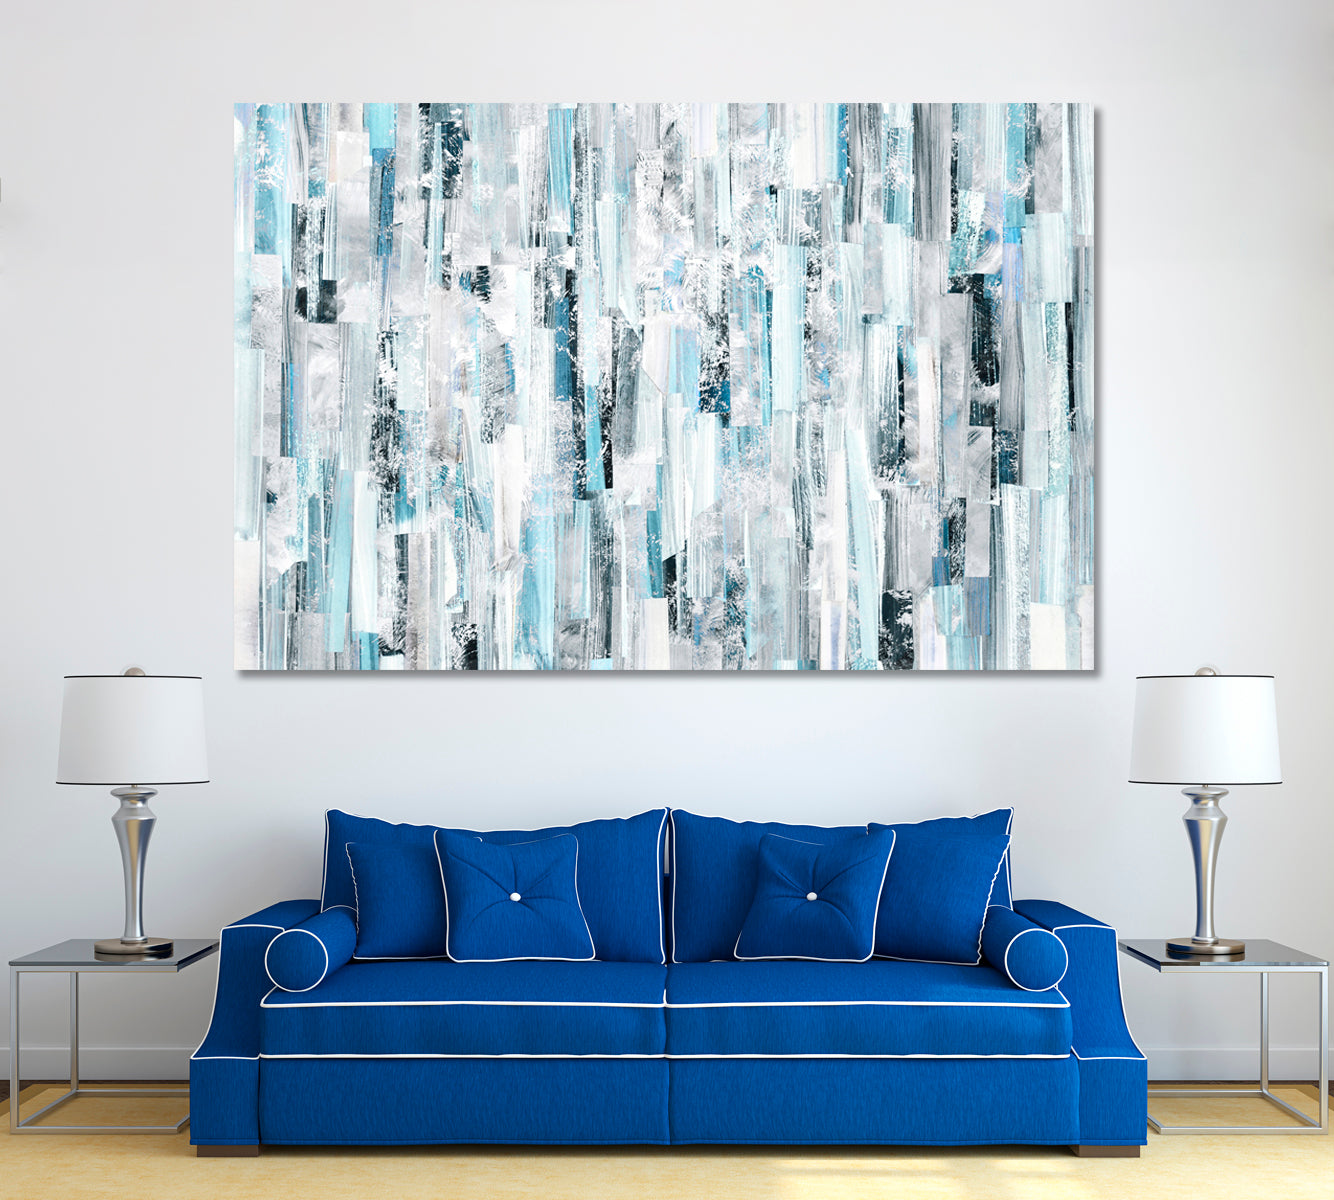 Abstract White and Blue Geometric Pattern Canvas Print ArtLexy 1 Panel 24"x16" inches 